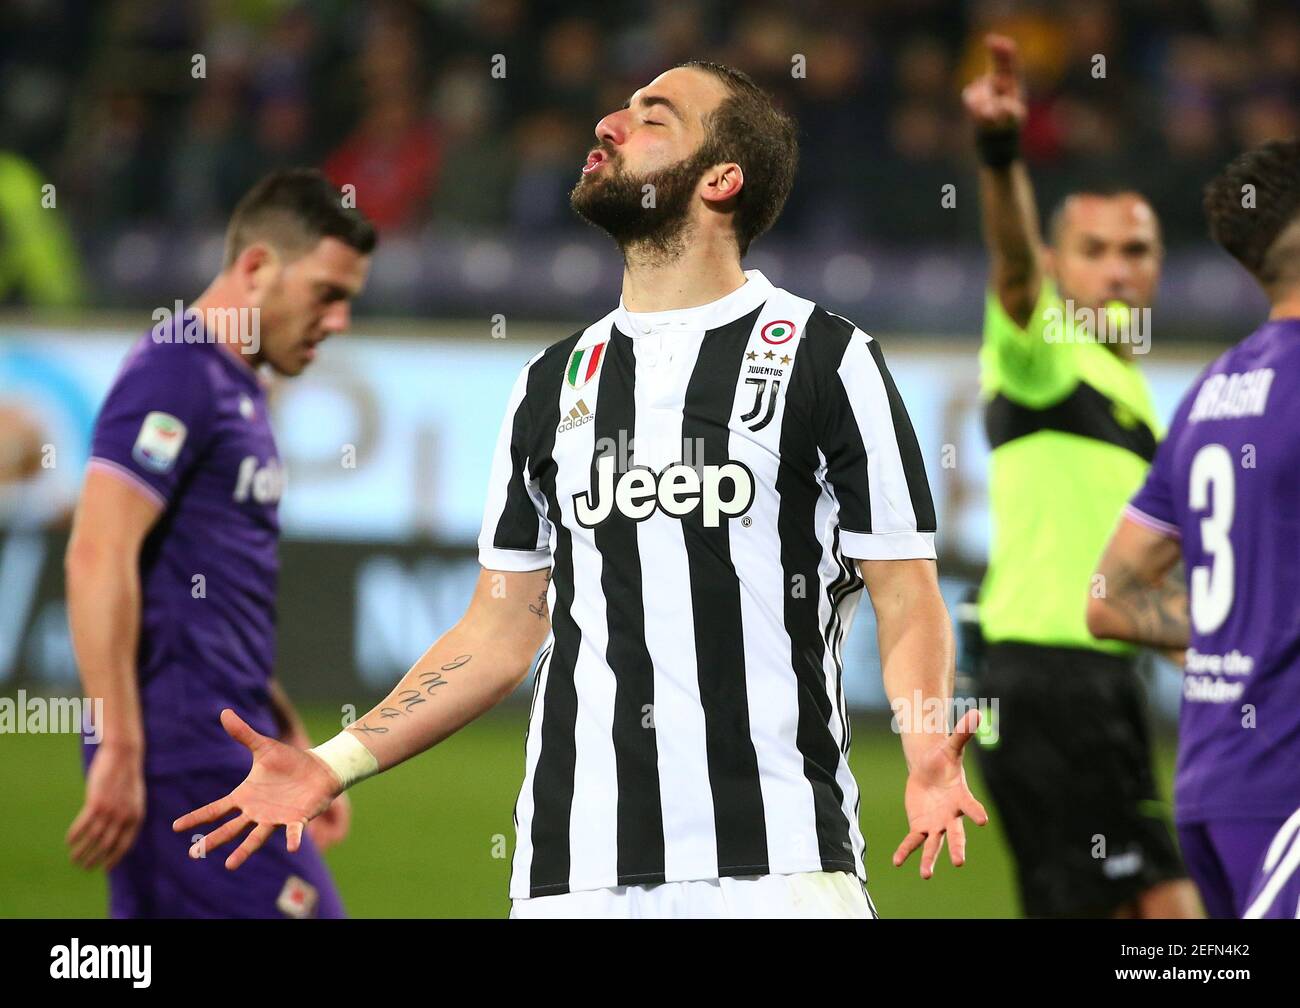 Gonzalo Higuain High Resolution Stock Photography and Images - Alamy